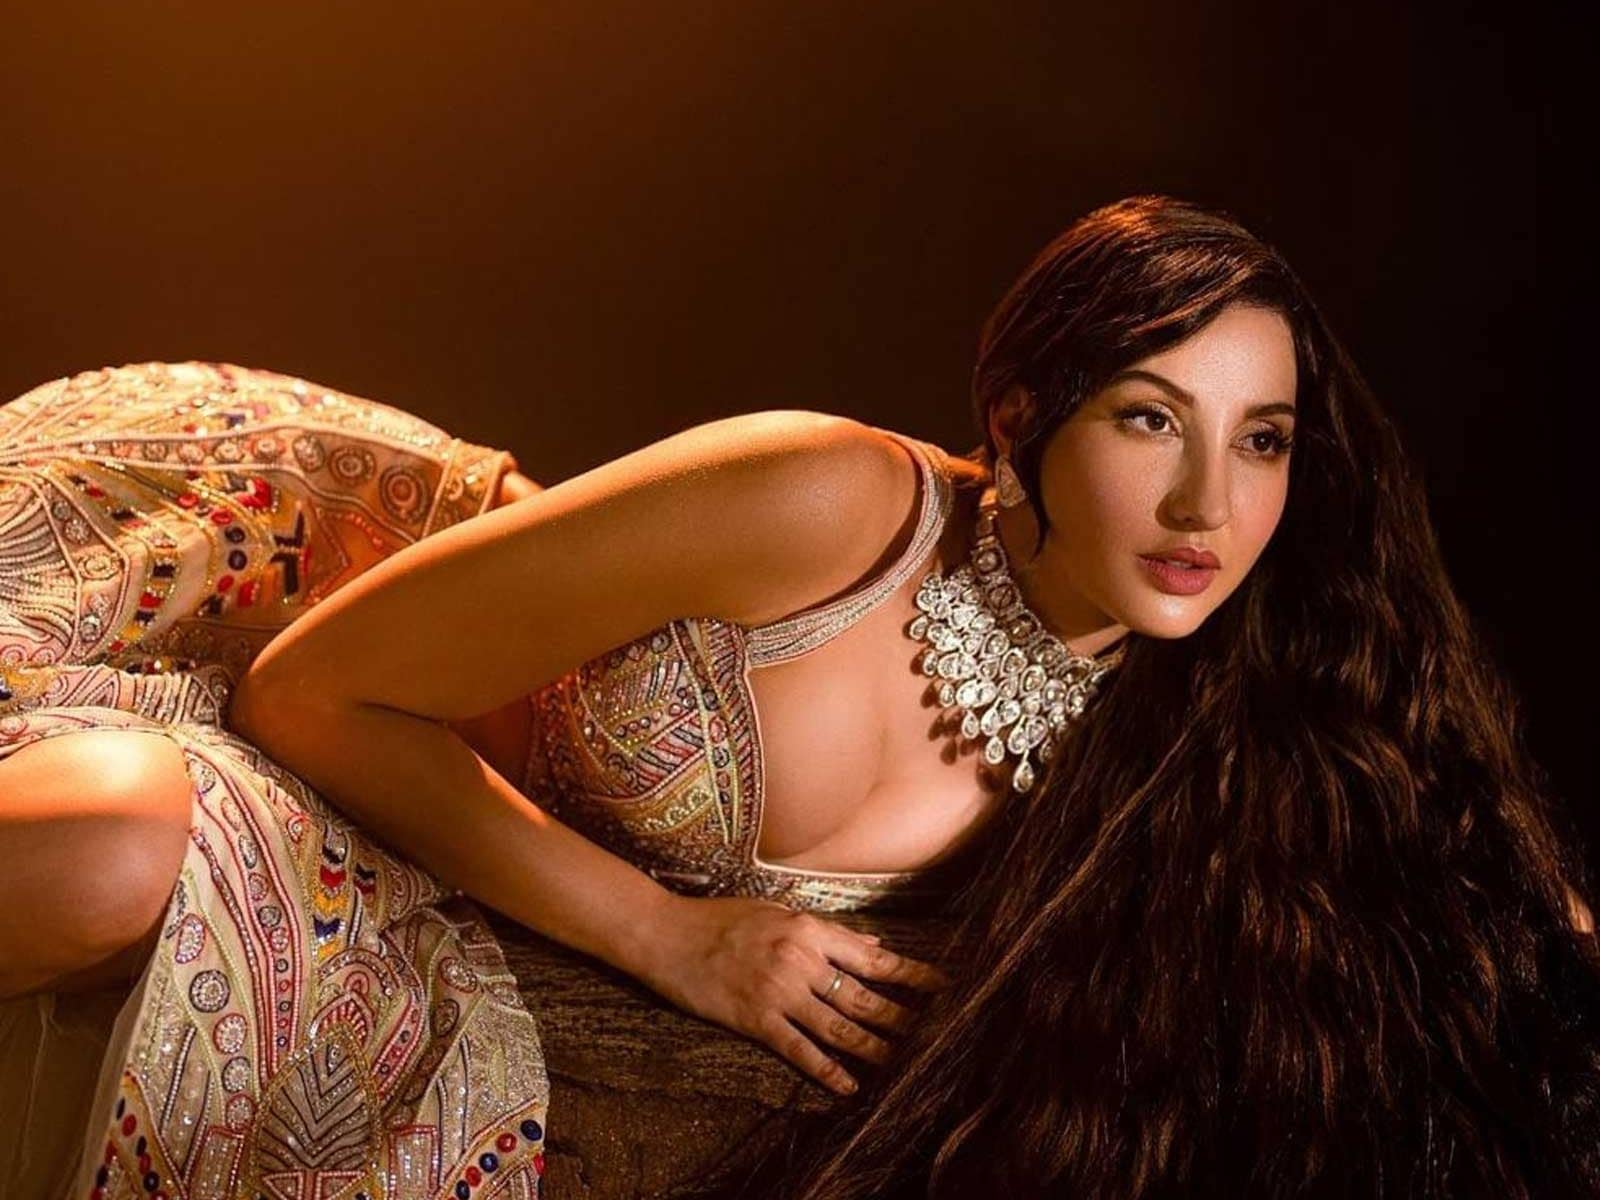 Nora Fatehi Looks Mesmerizing in Gorgeous Indian Outfit, See Pics - News18